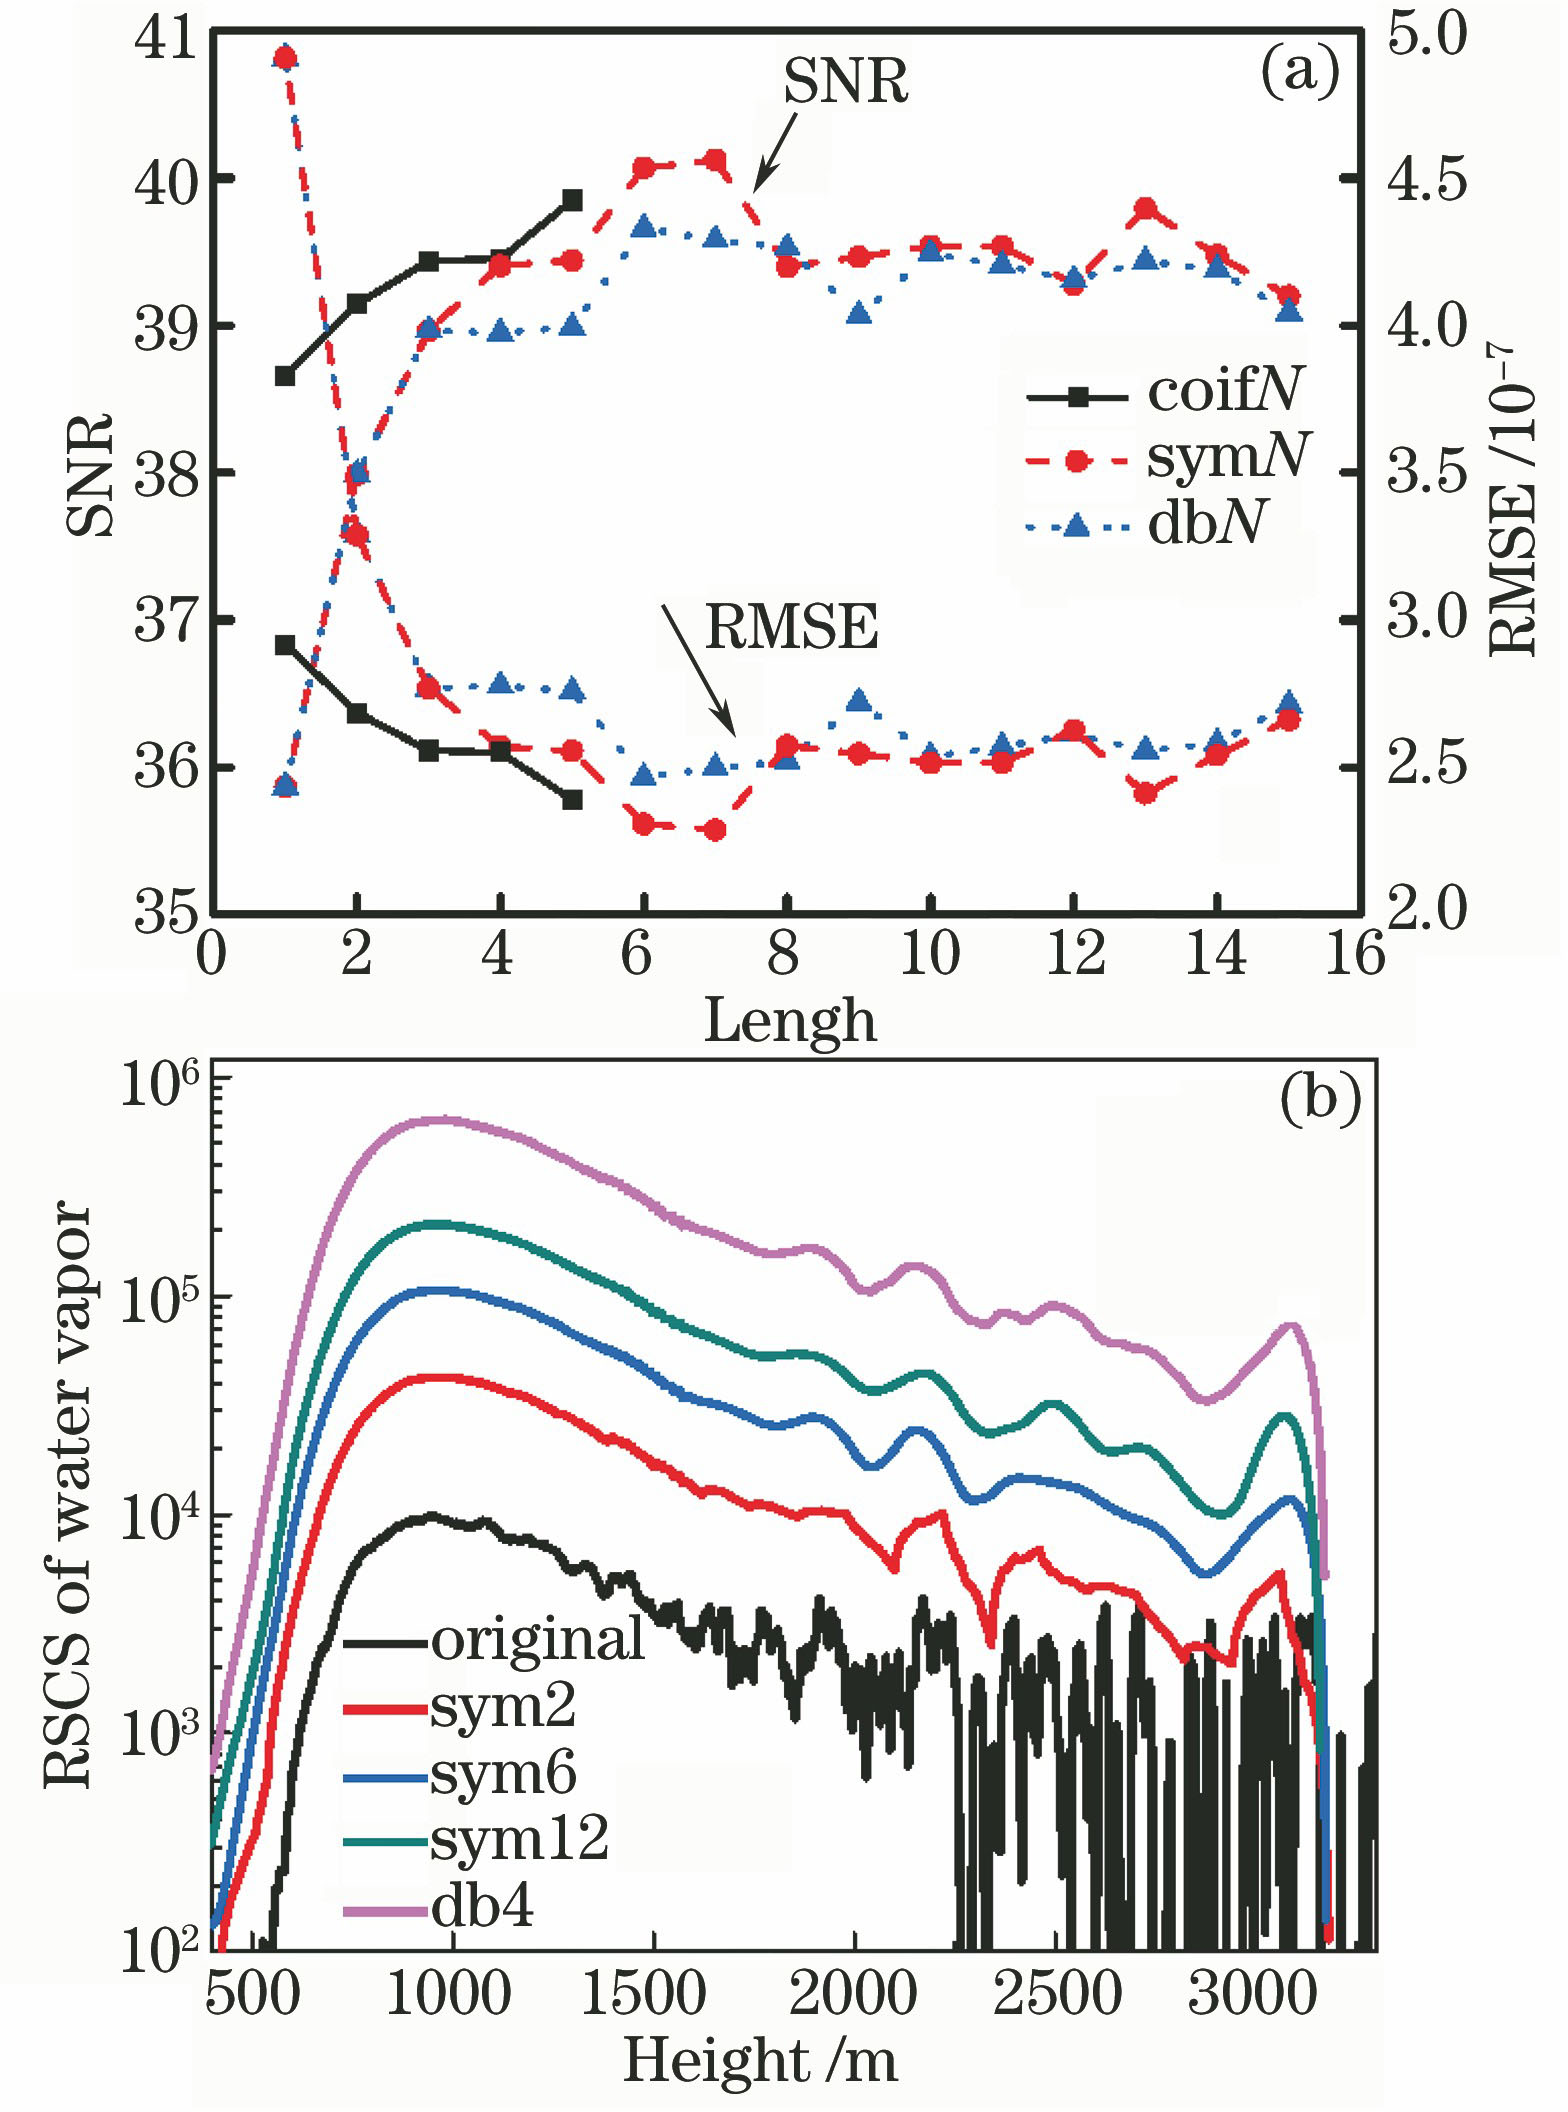 Comparison of water vapor Raman scattering signals before and after denoising detected in daytime. (a) SNR and RMSE denoised by wavelet basis with different filter lengths; (b) comparison of range-square-corrected results before and after denoising